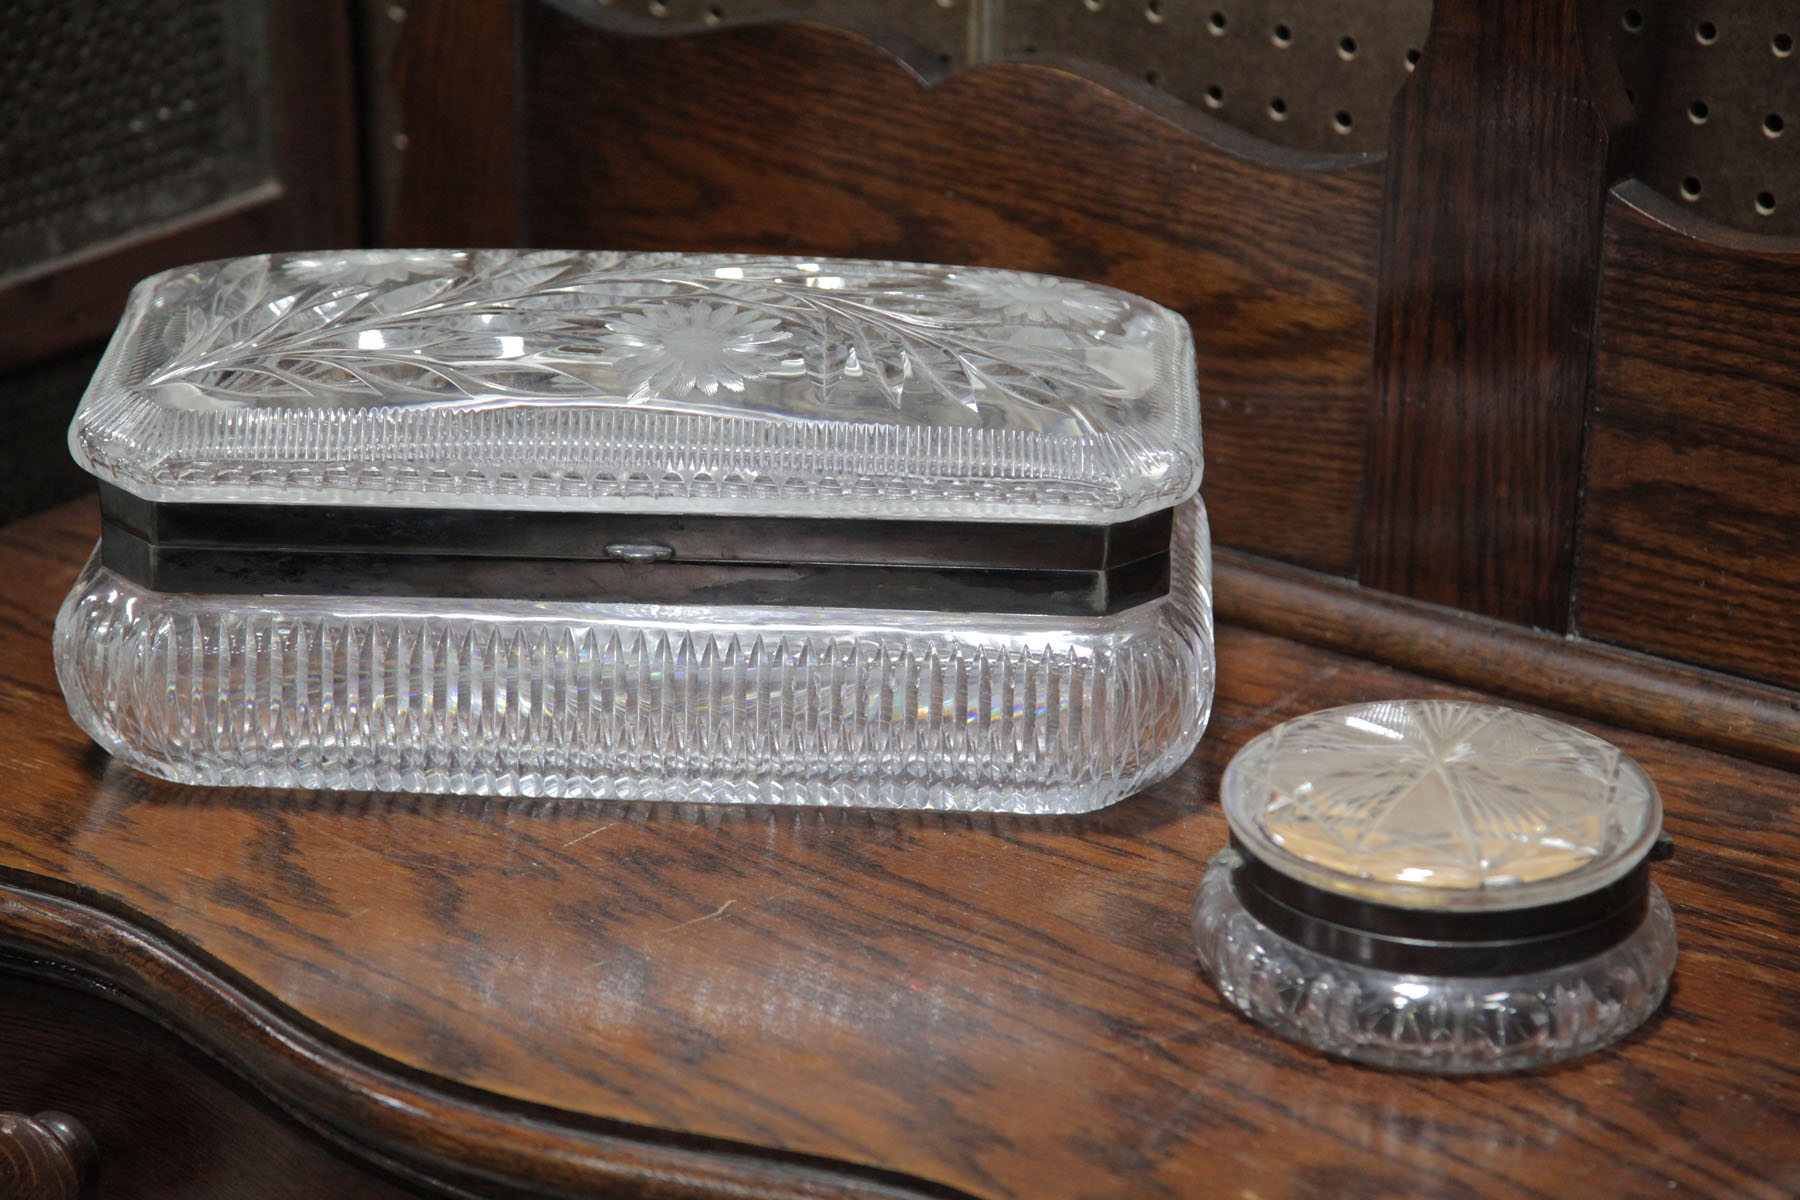 TWO CUT GLASS BOXES.  American  late